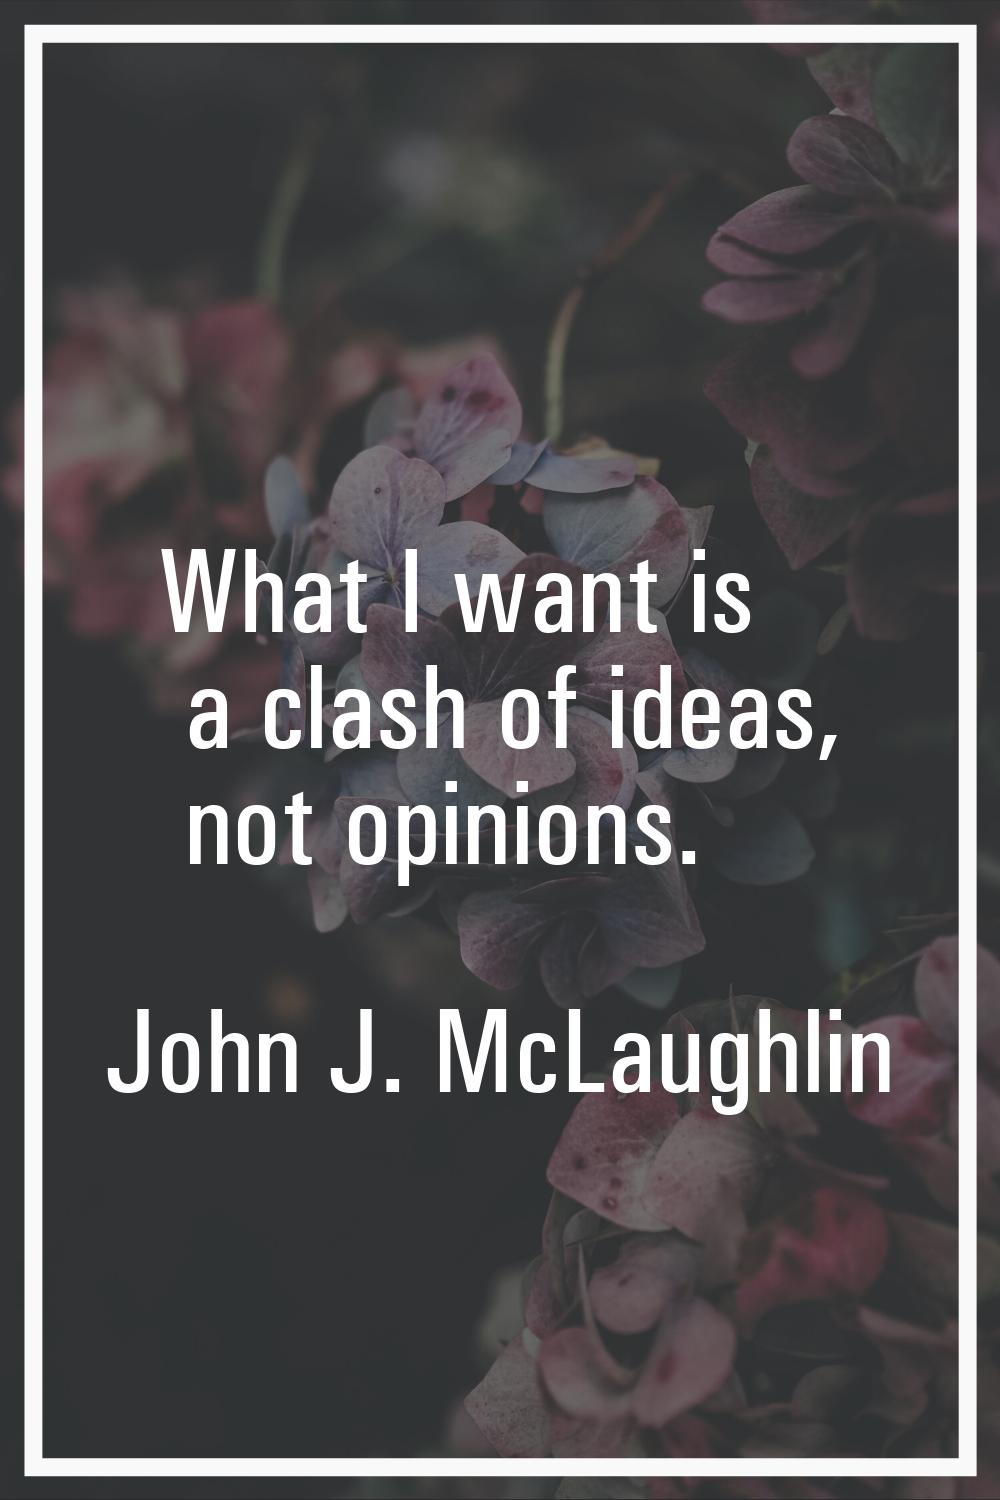 What I want is a clash of ideas, not opinions.